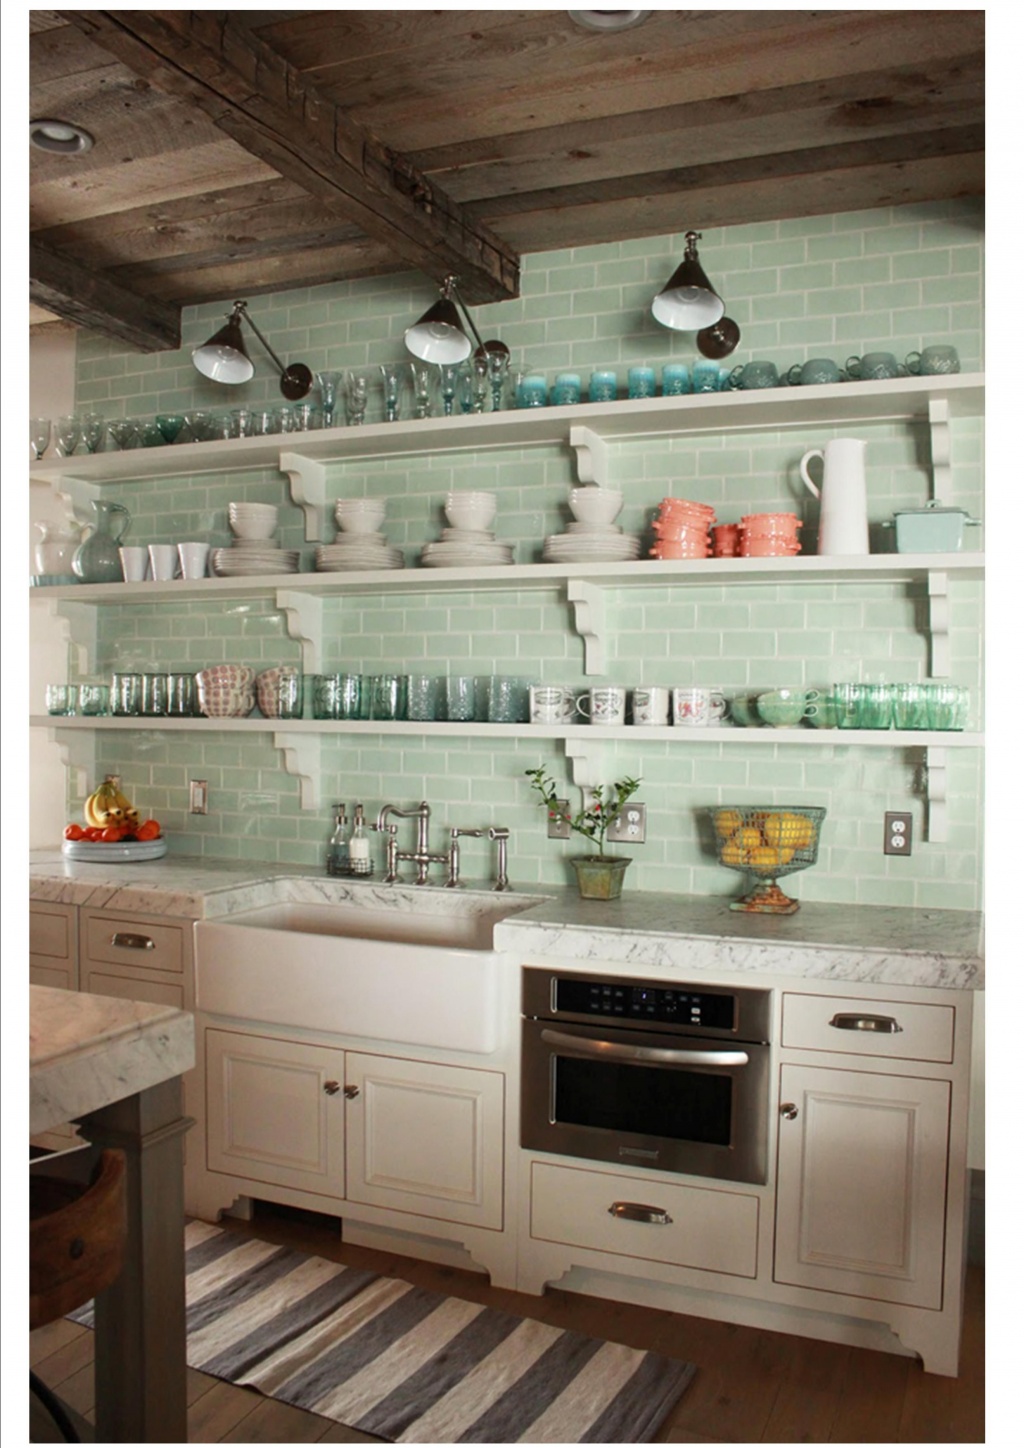 Adorable country kitchen lighting